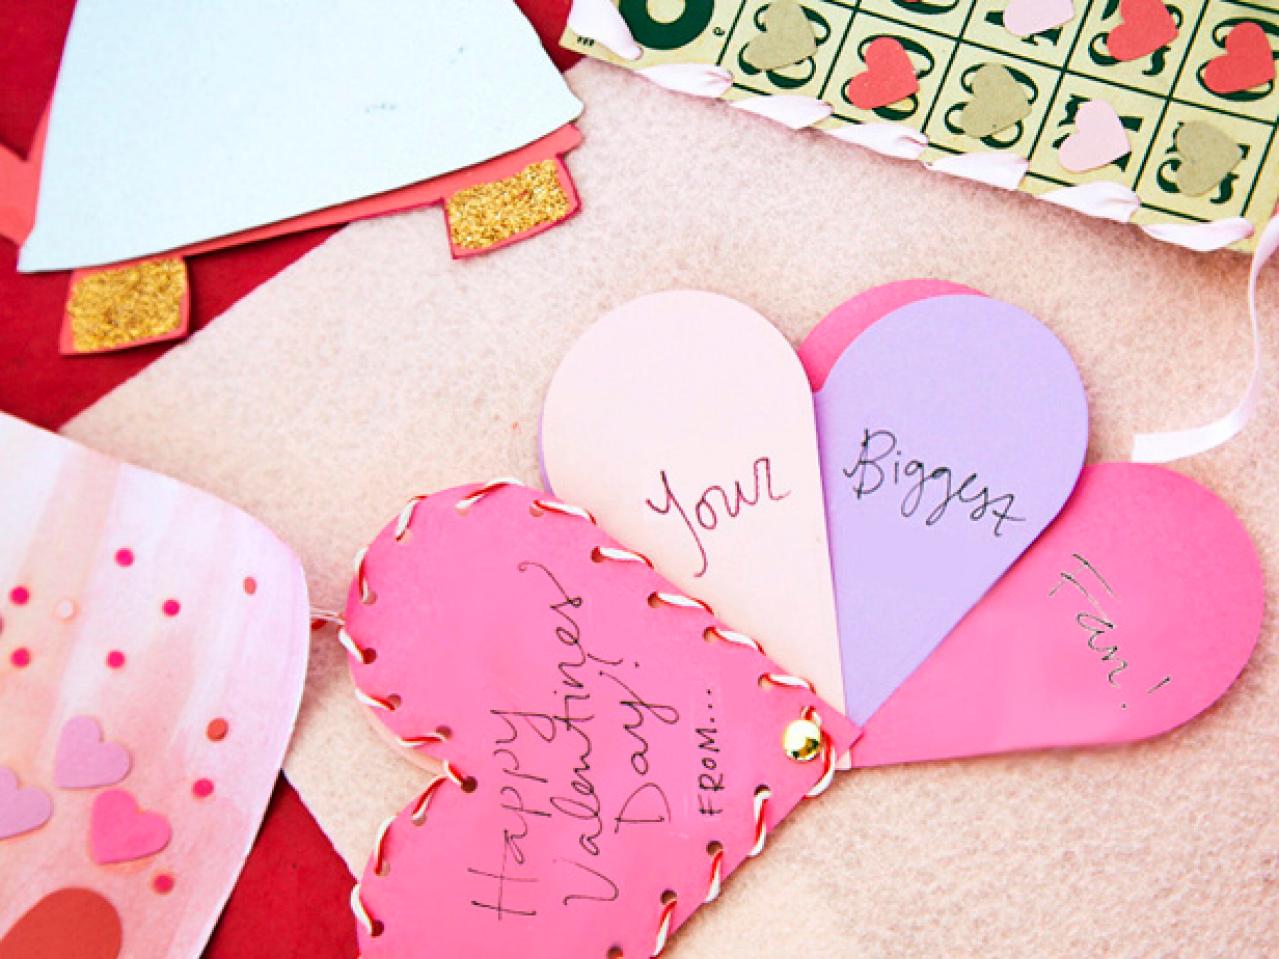 Handmade Valentine's Day Cards | Easy Crafts and Homemade Decorating & Gift Ideas | HGTV